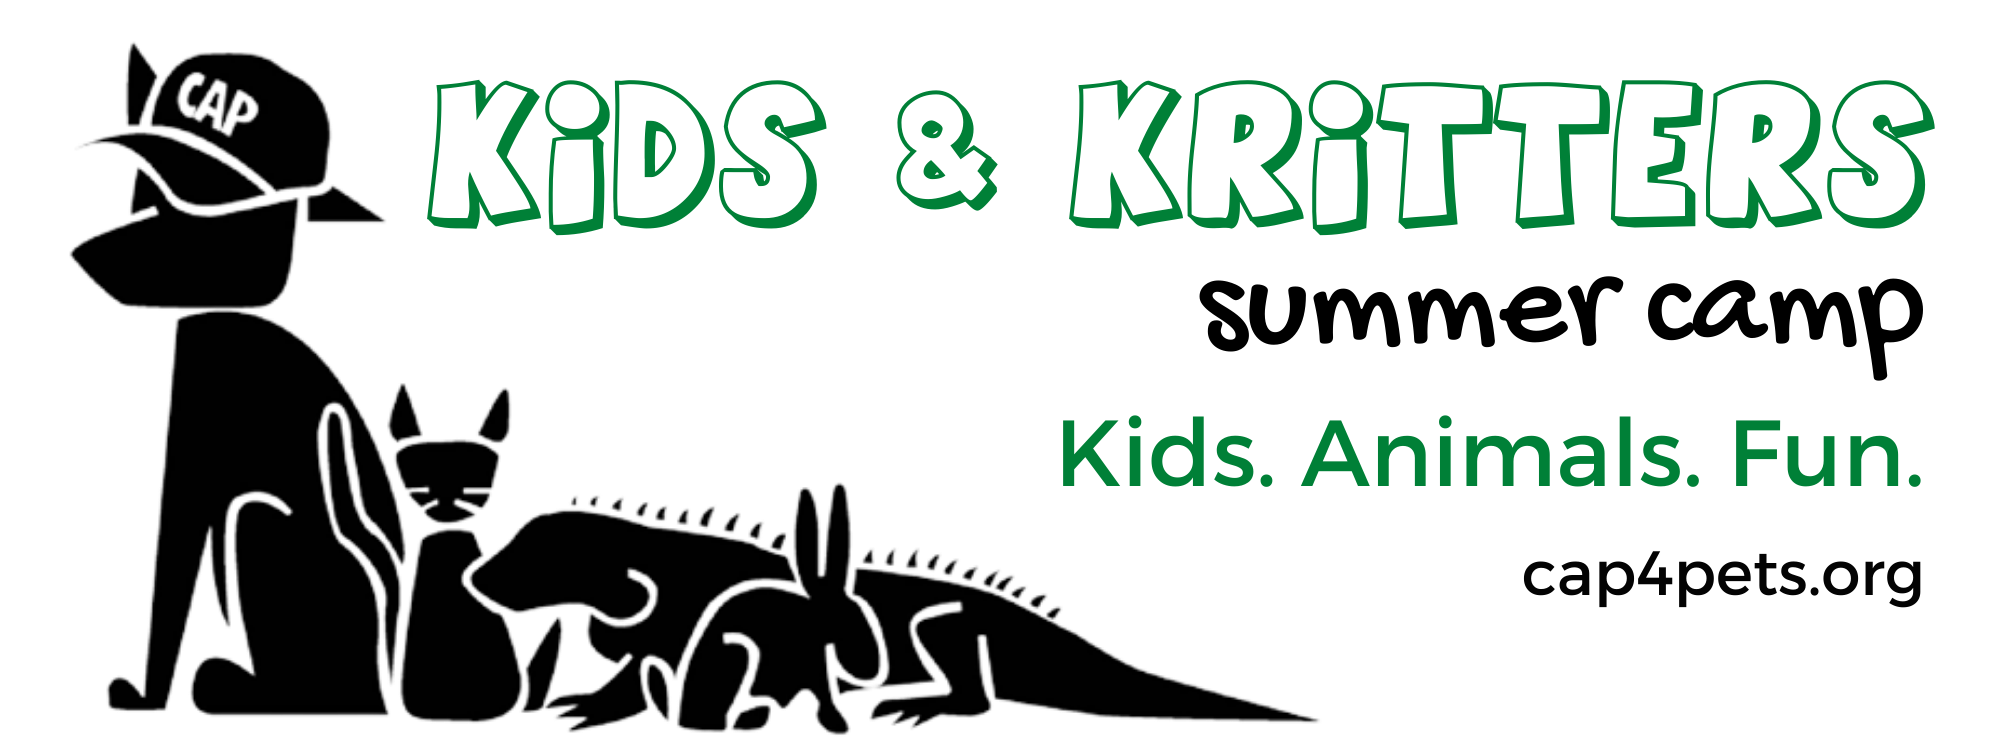 Kids Kritters camp